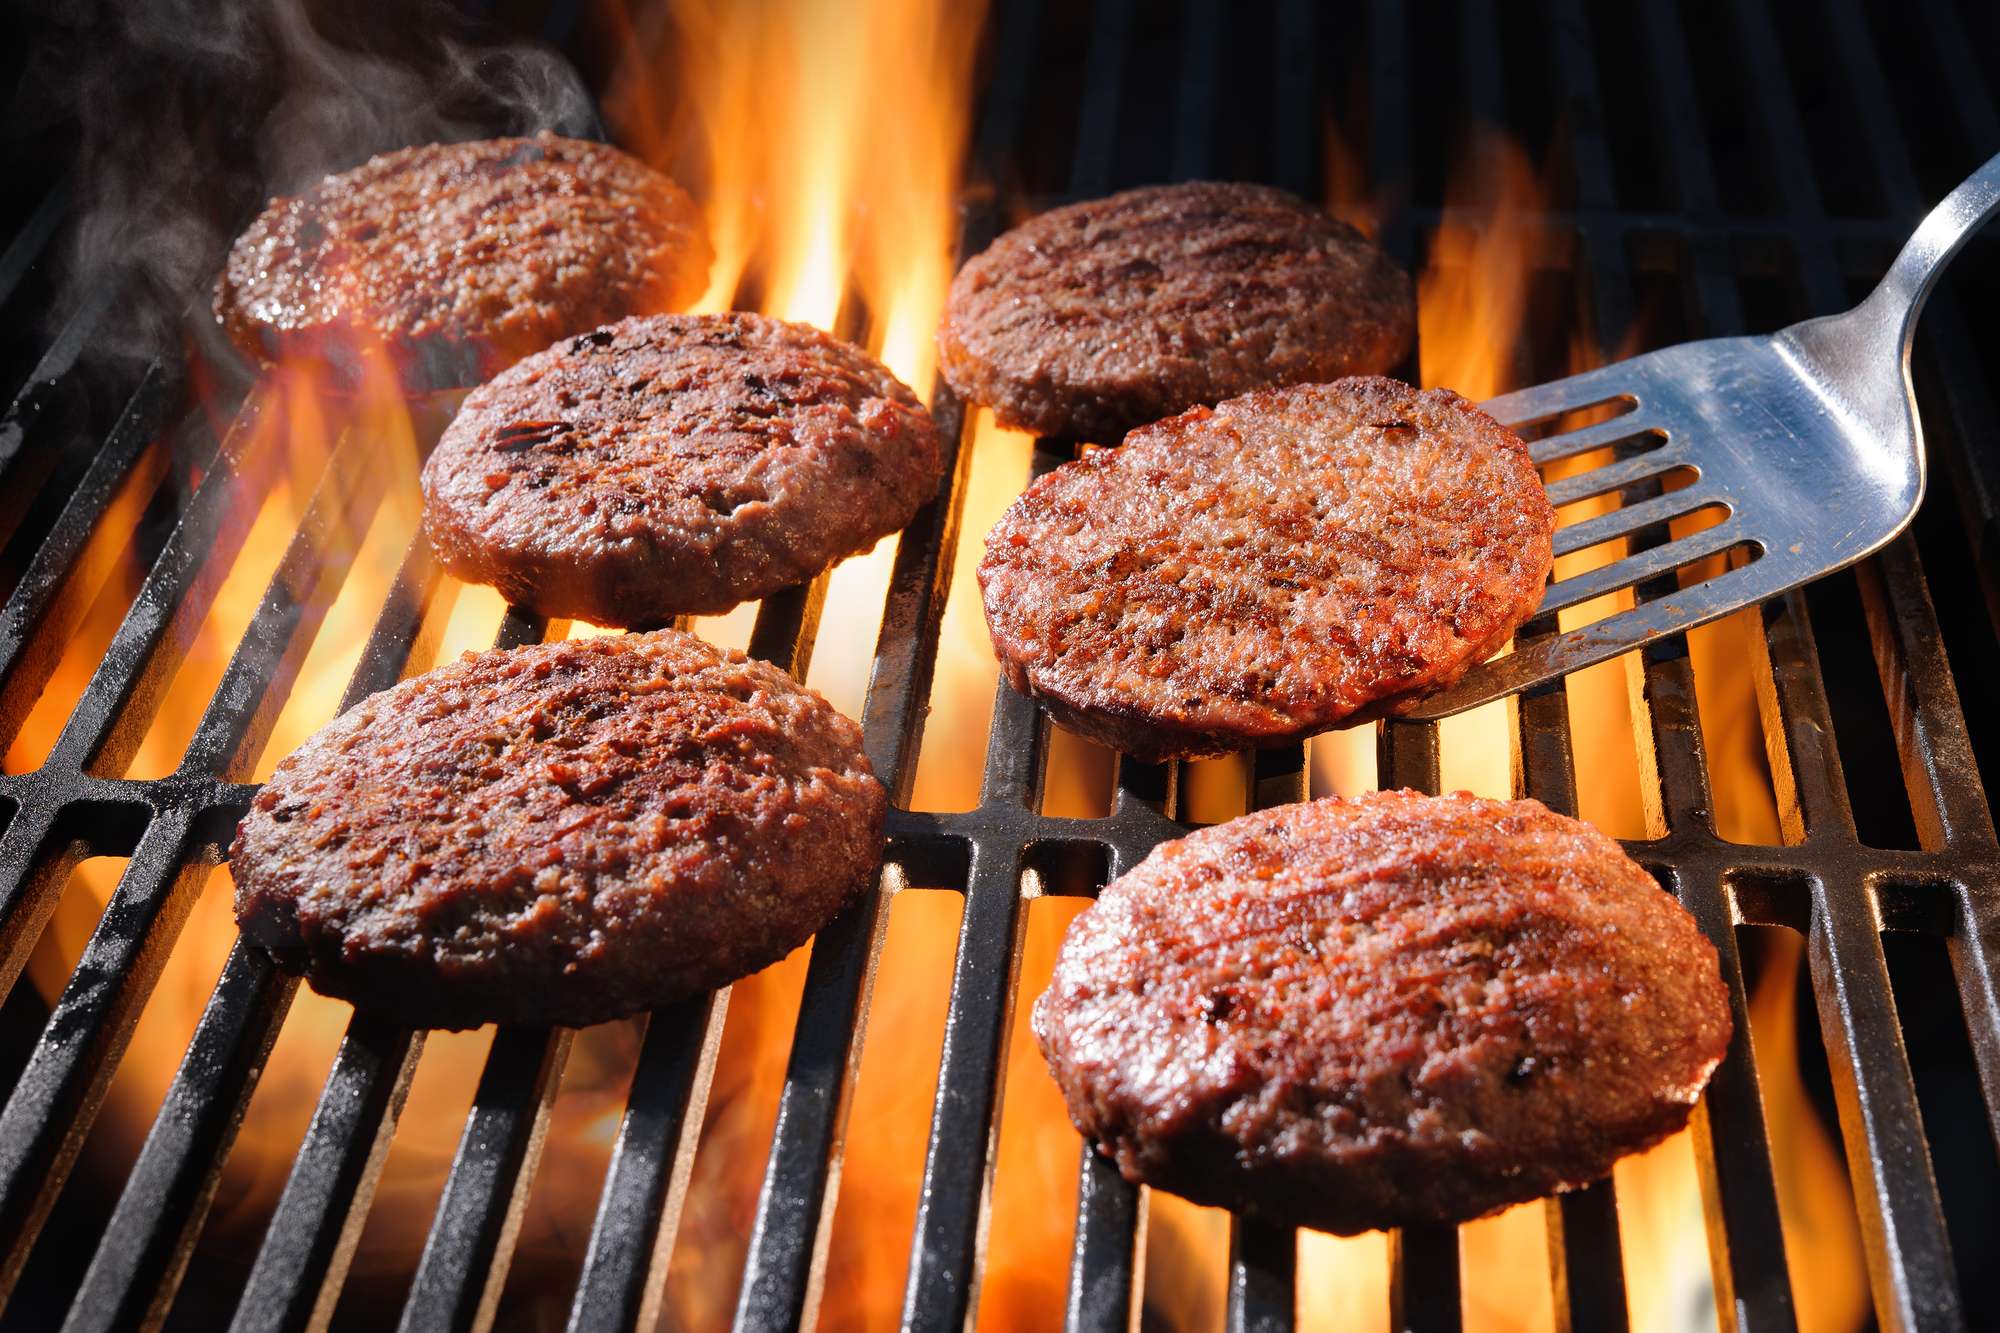 Should You Grill Burgers Frozen or Thawed? - Barbehow